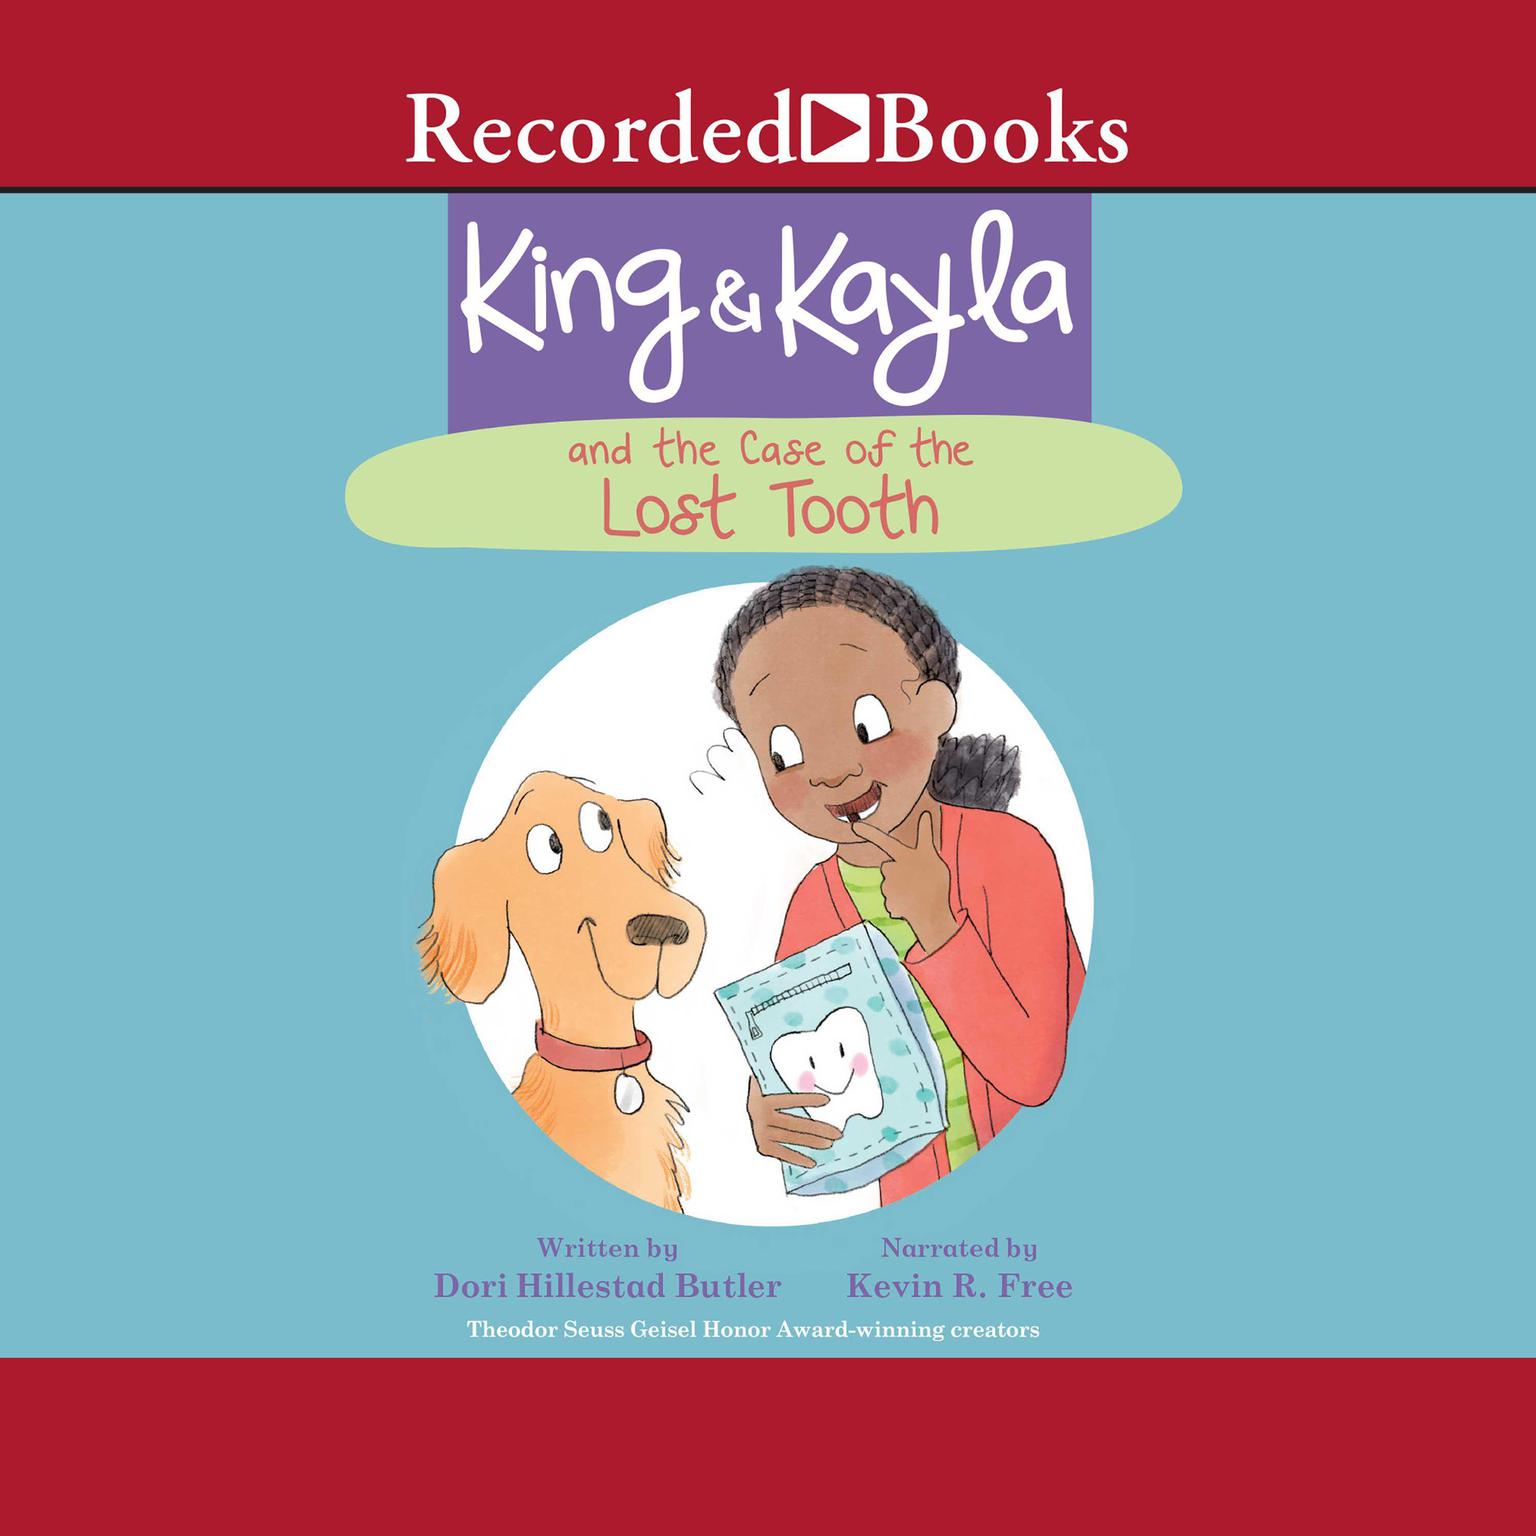 King & Kayla and the Case of the Lost Tooth Audiobook, by Dori Hillestad Butler  